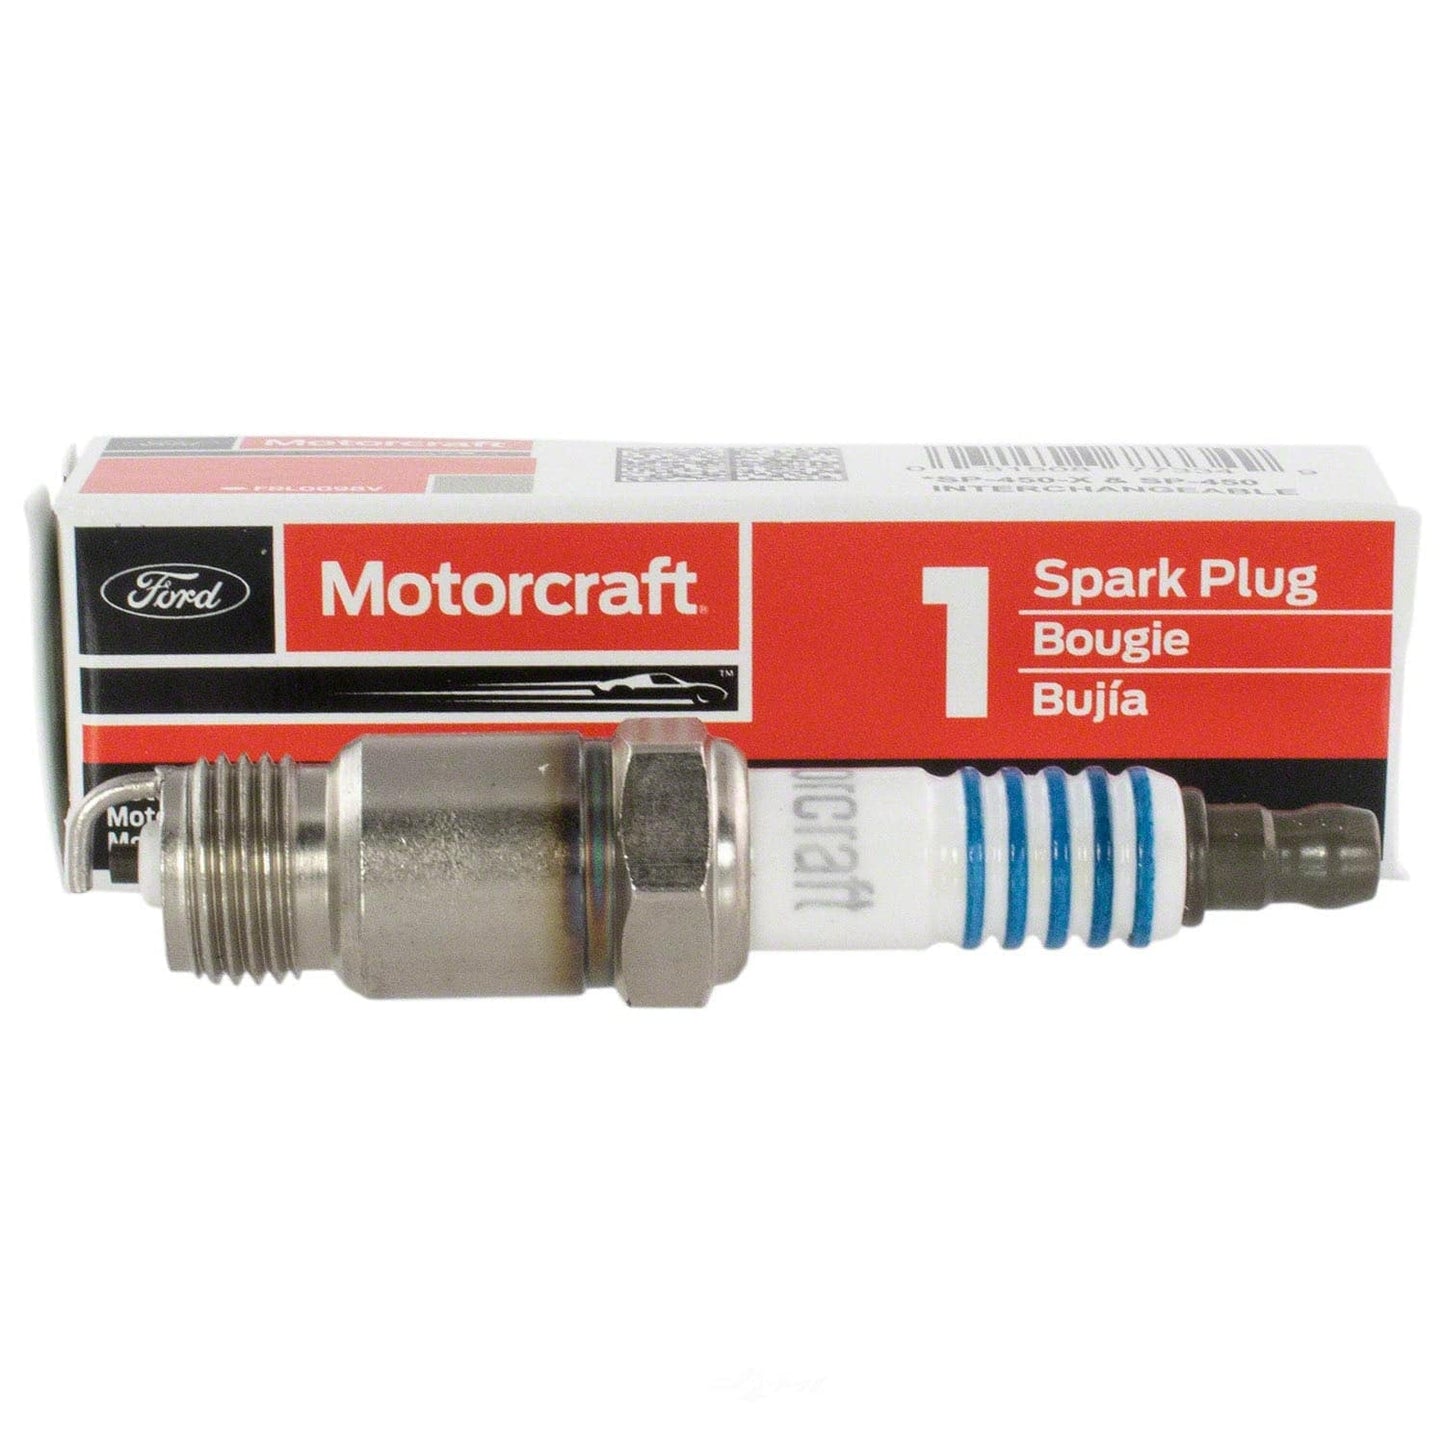 Spark Plugs Ford F150 1975 1976 1977 1978 1979 1980 1981 1982 1983 1984 1985 1986